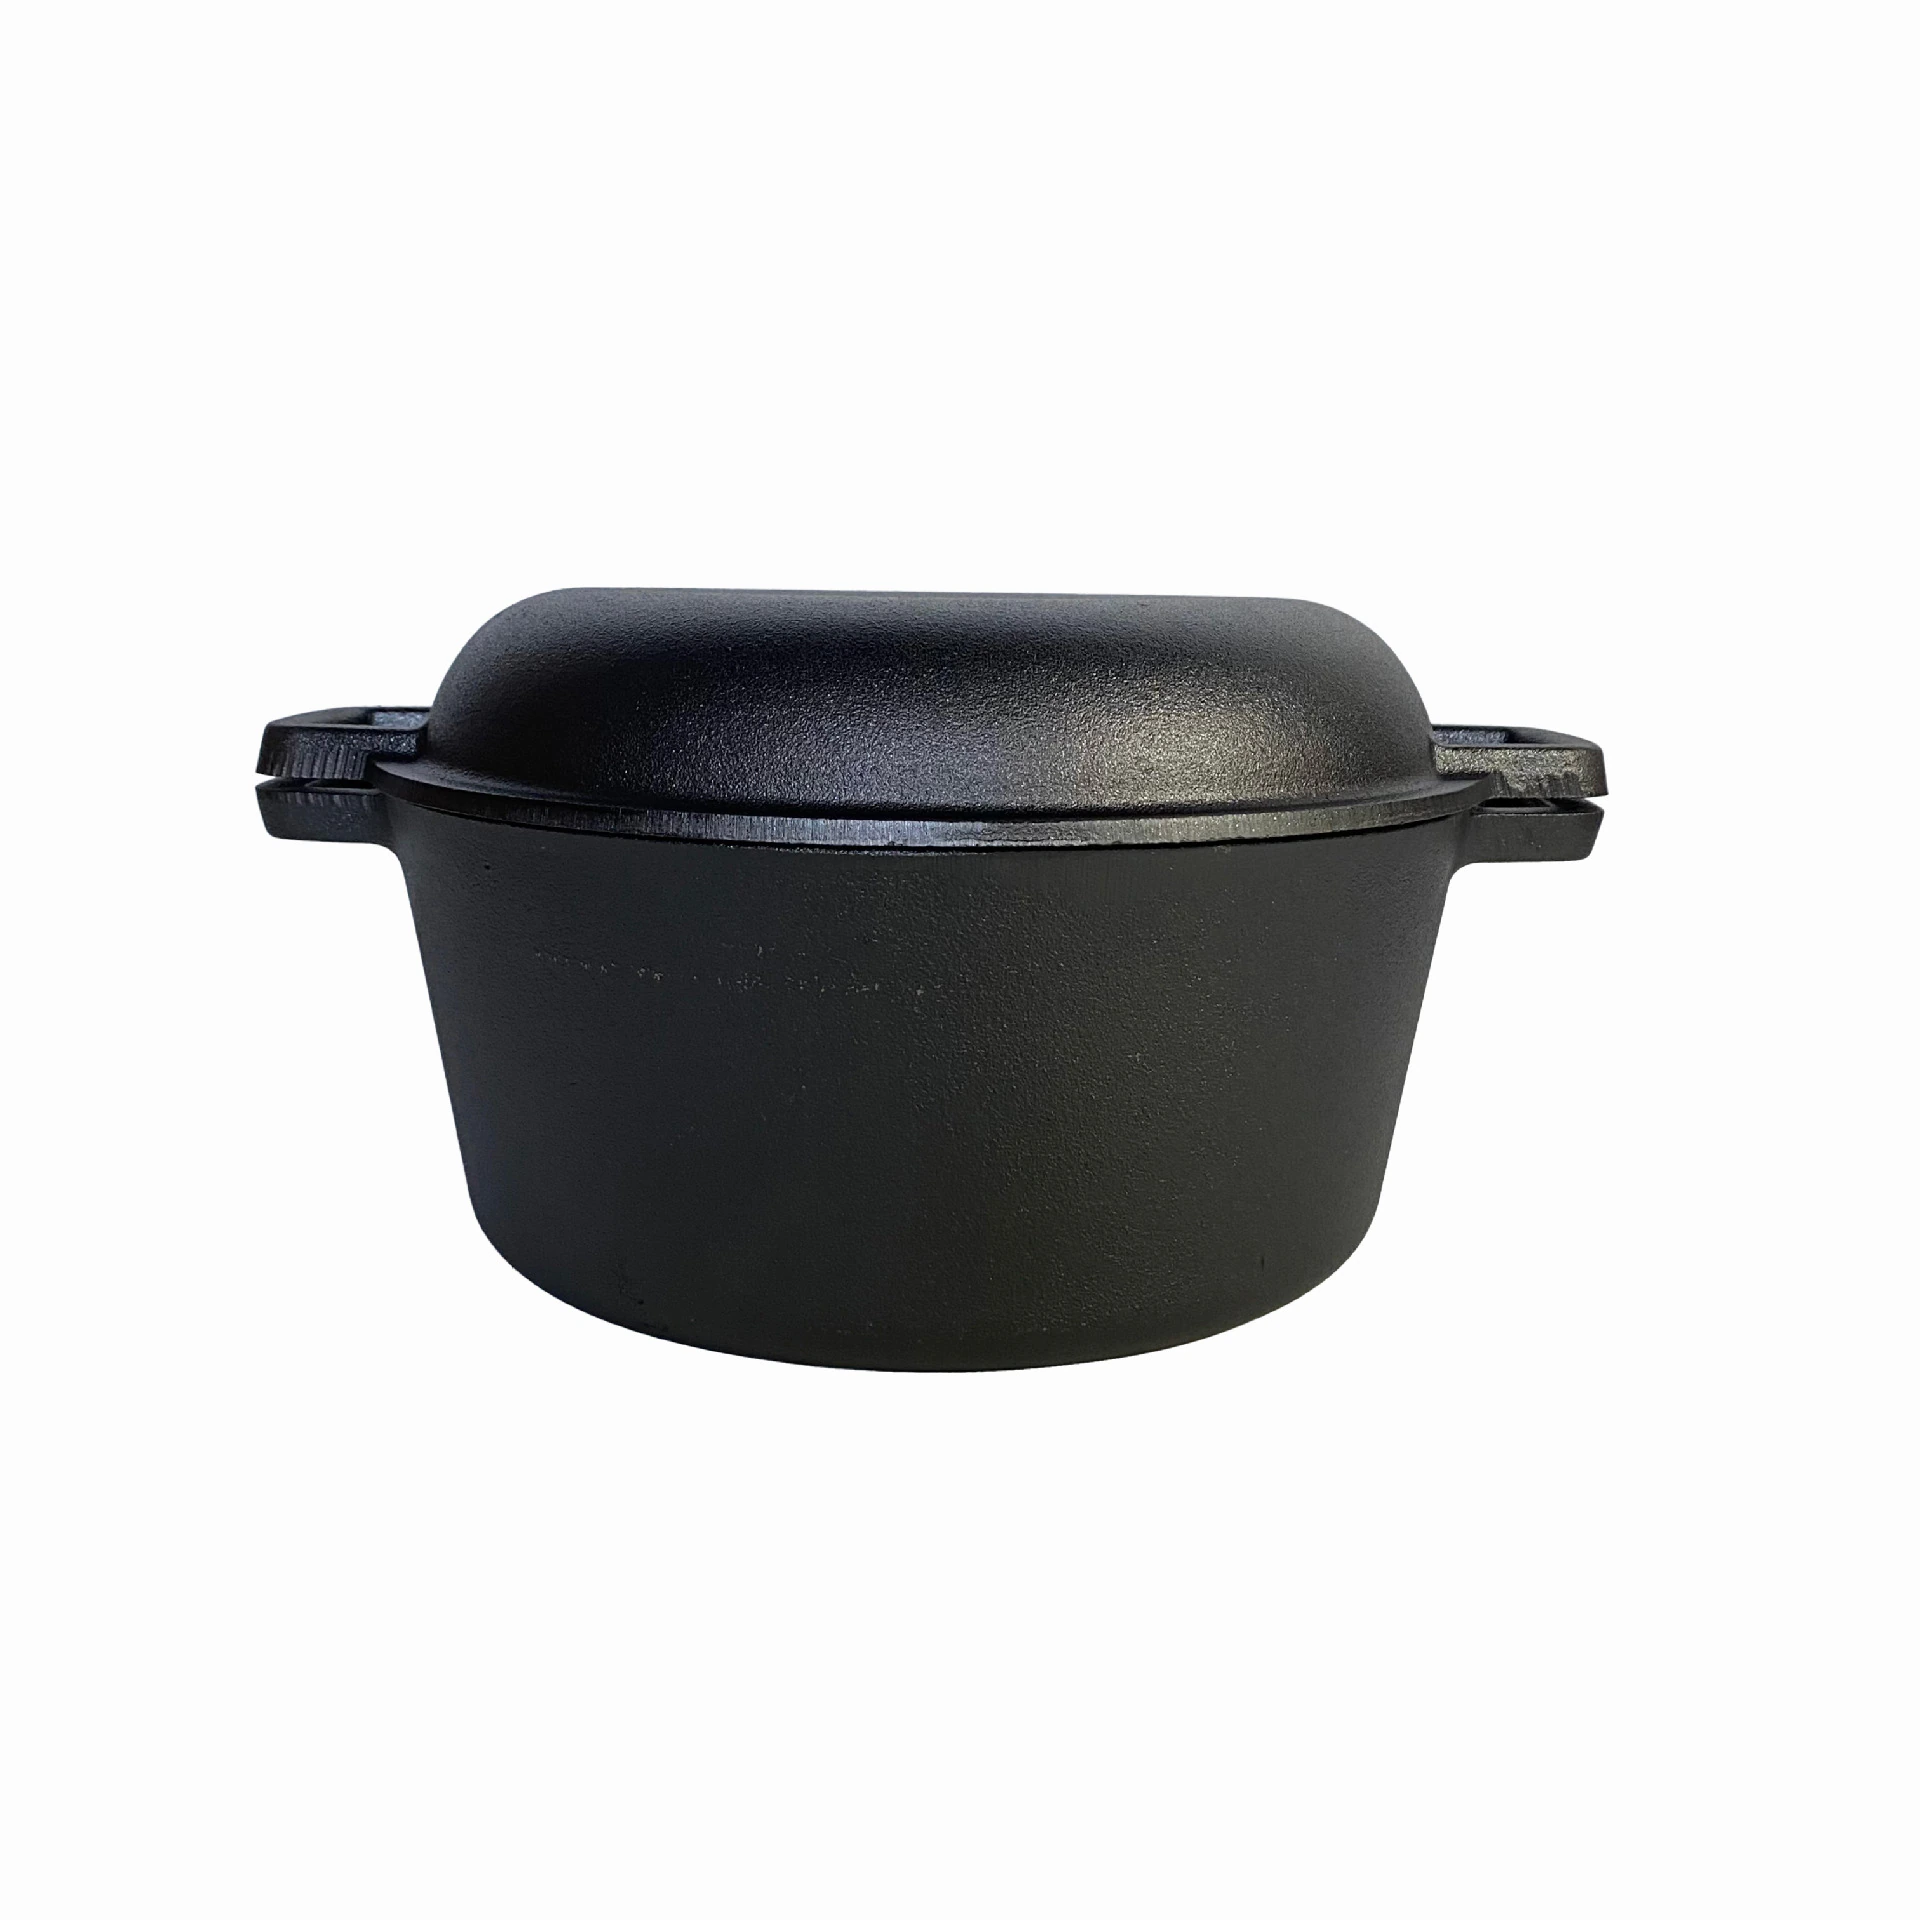 Cooking Pots 2 in 1 Seasoned Cast Iron Double Dutch Oven Combo Cooker for High Quality Cast Iron Home Kitchen Cookware